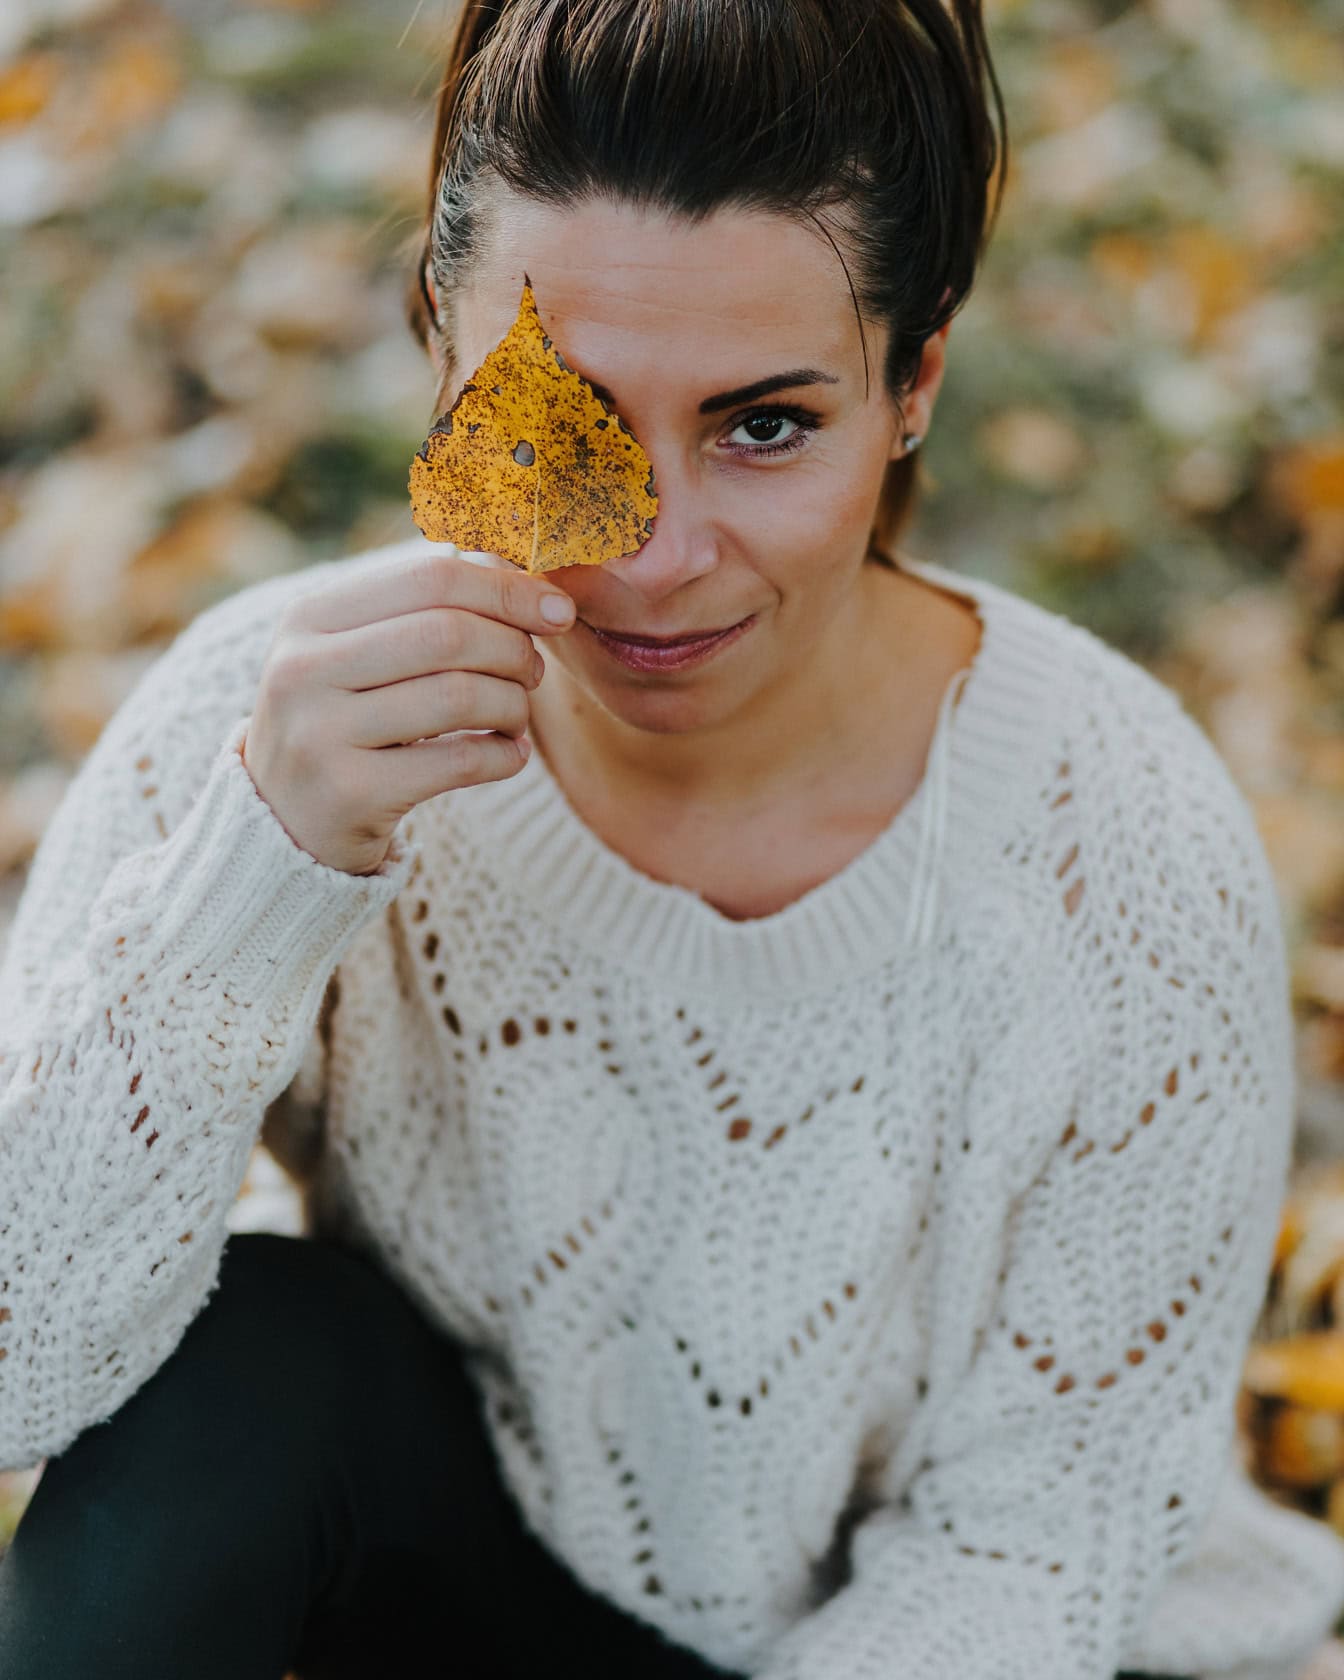 Portrait of young beautiful woman holding a leaf over her eye